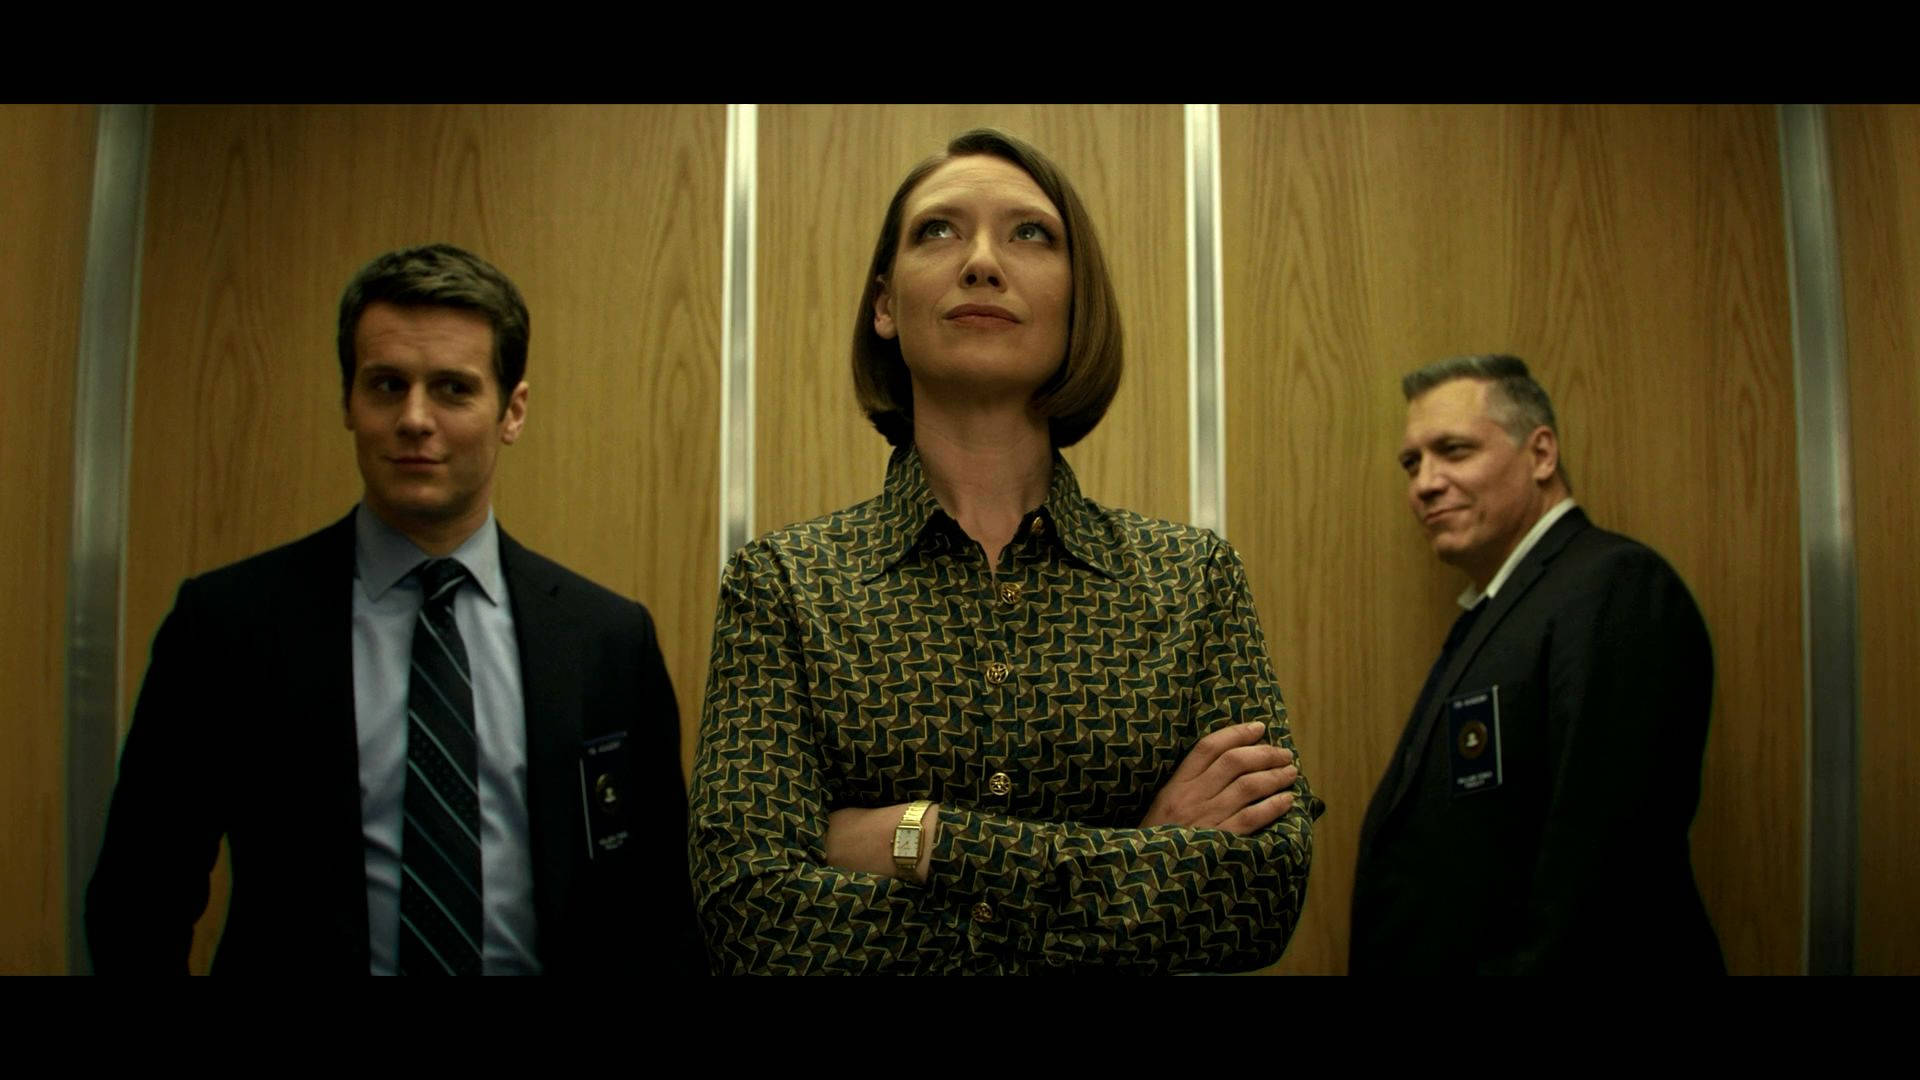 The captivating elevator scene from Mindhunter. Wallpaper